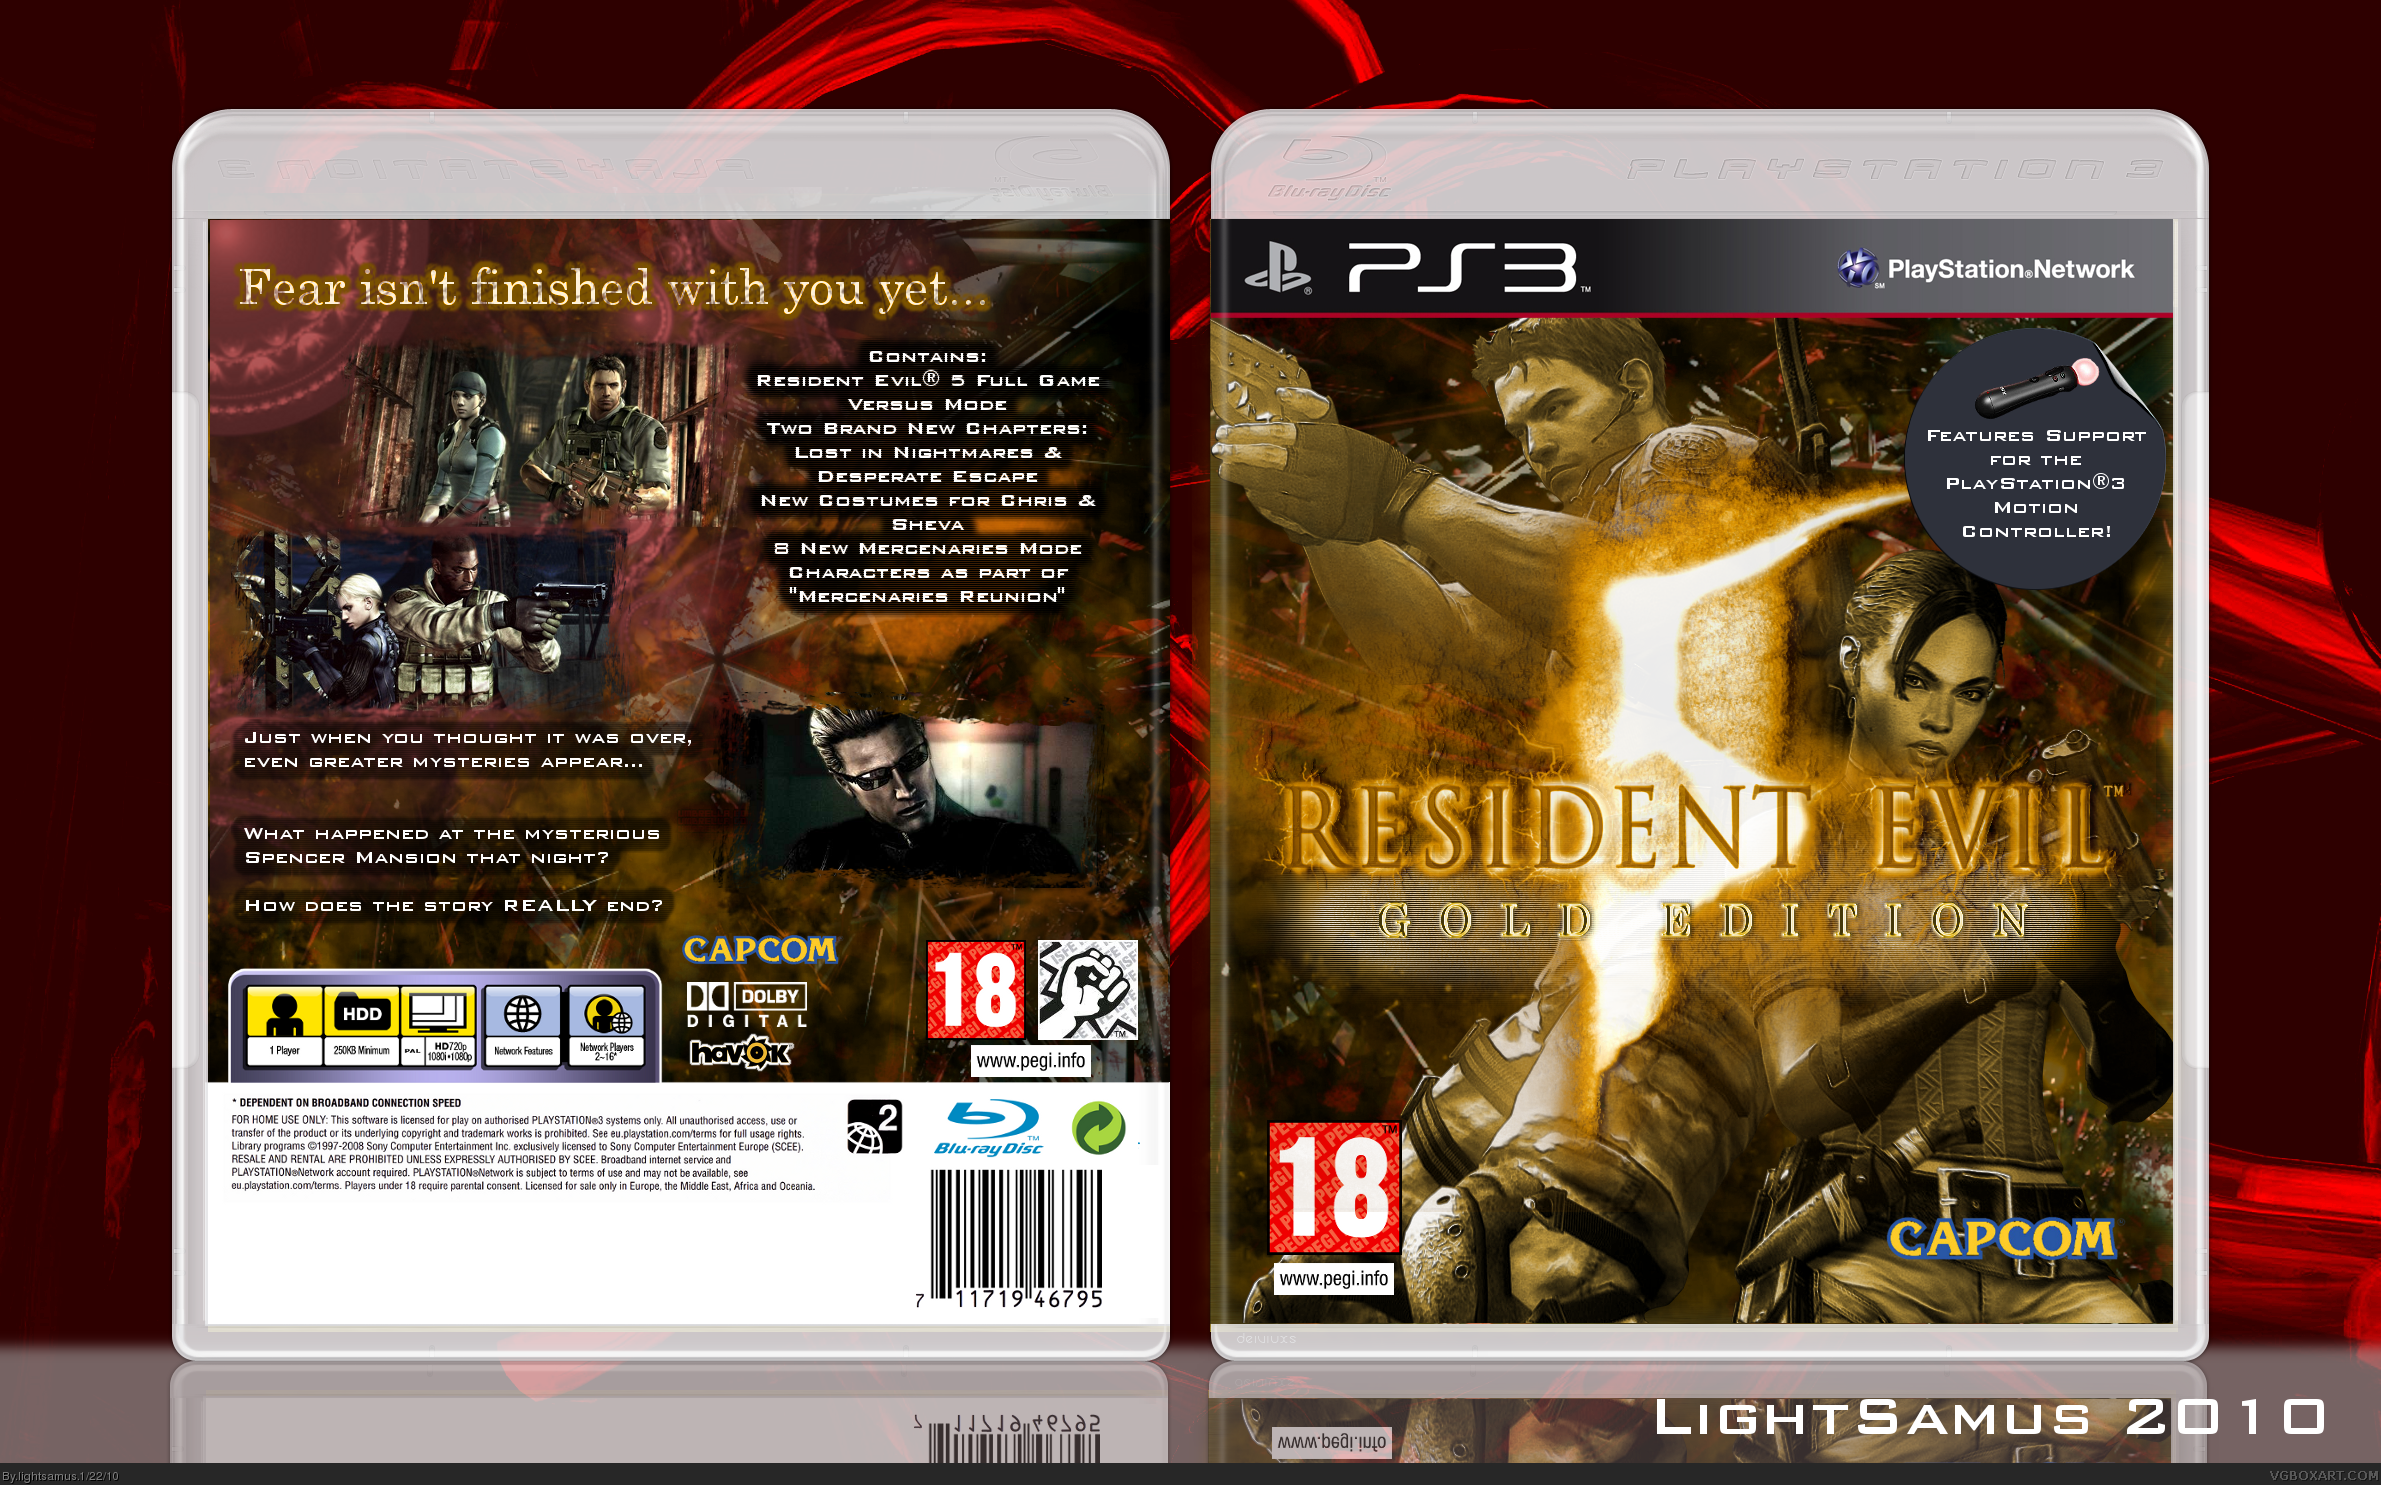 Resident Evil 5: Gold Edition box cover